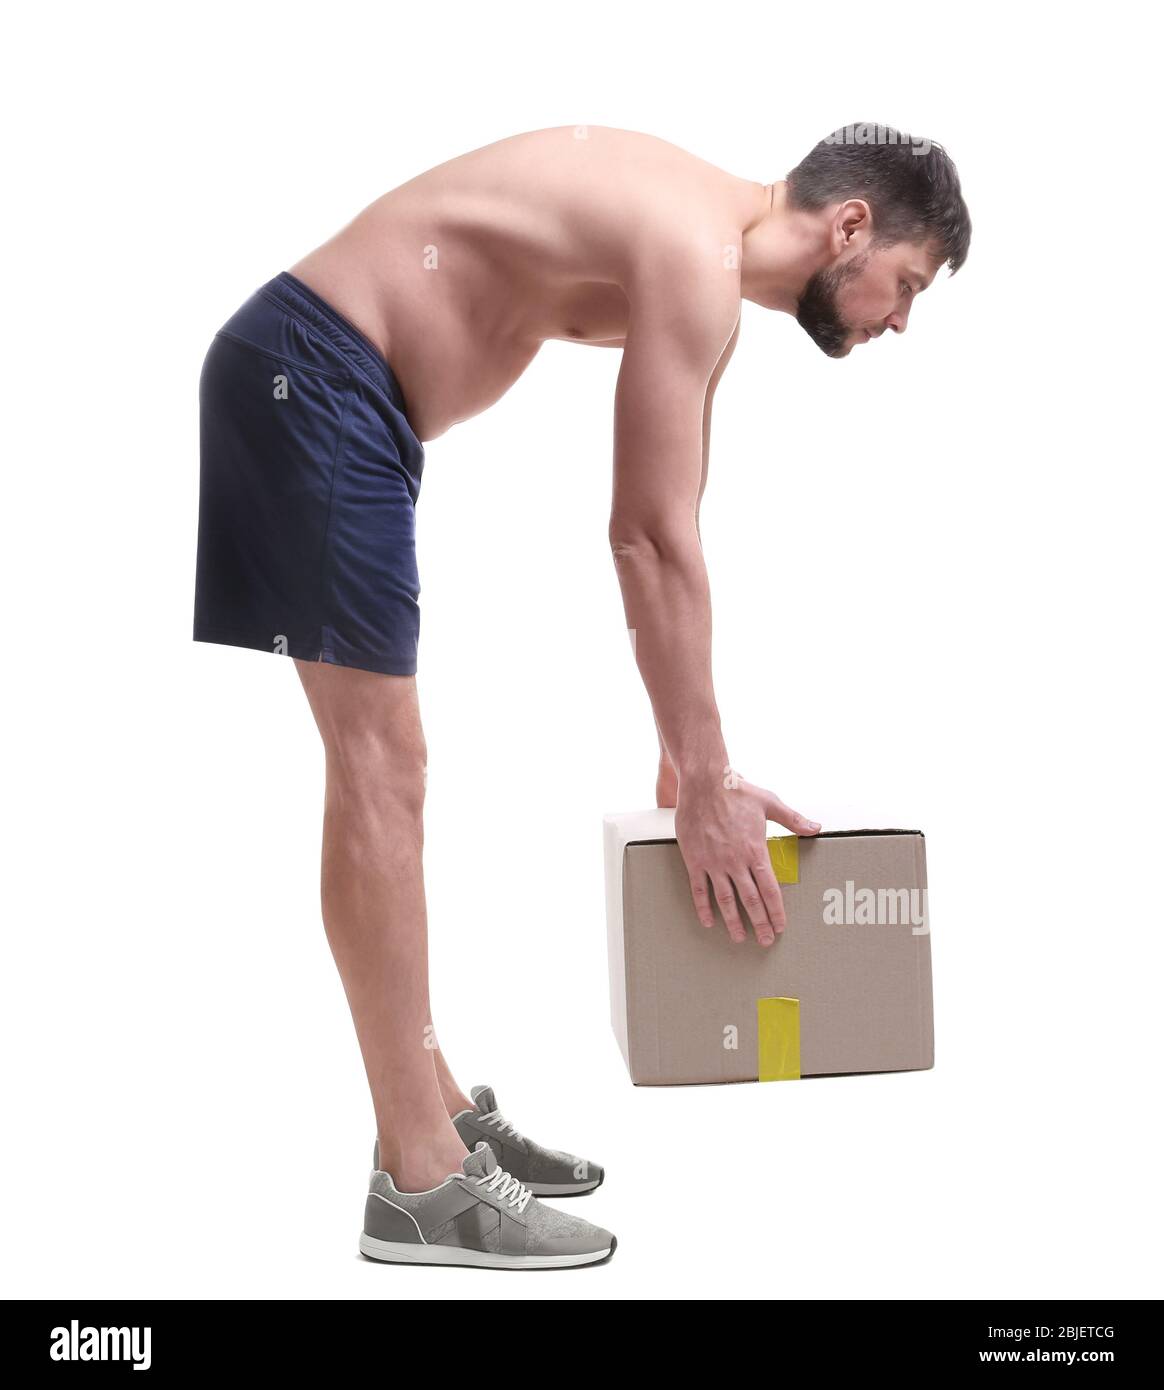 Posture concept. Man lifting heavy cardboard box against white background Stock Photo